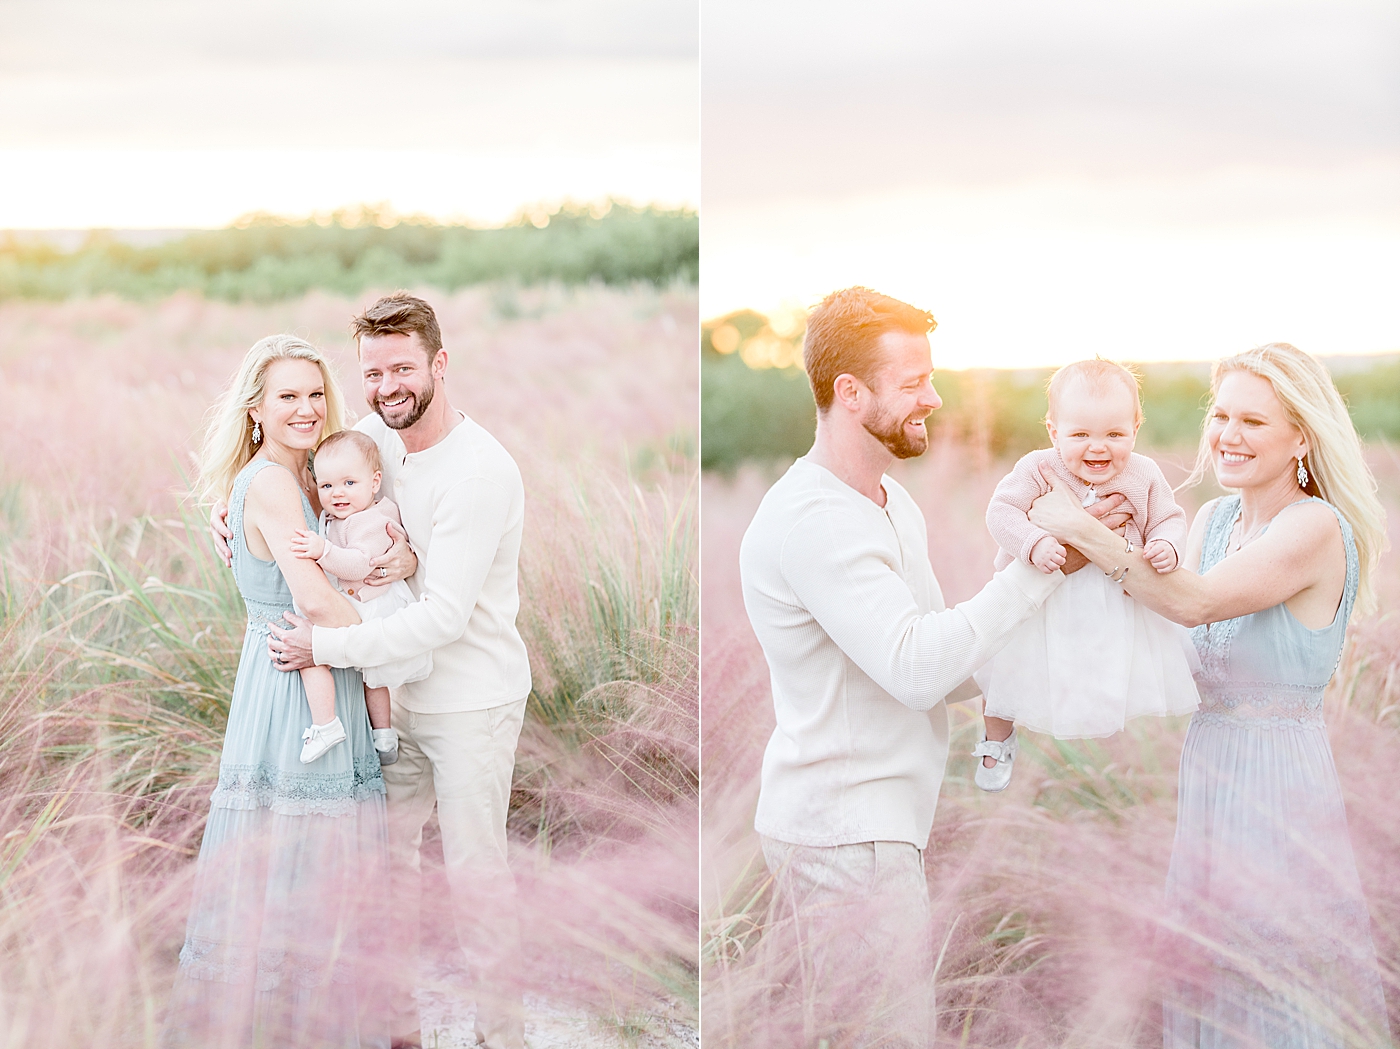 Mom and Dad with their one year old daughter. Photo by Brittany Elise Photography.